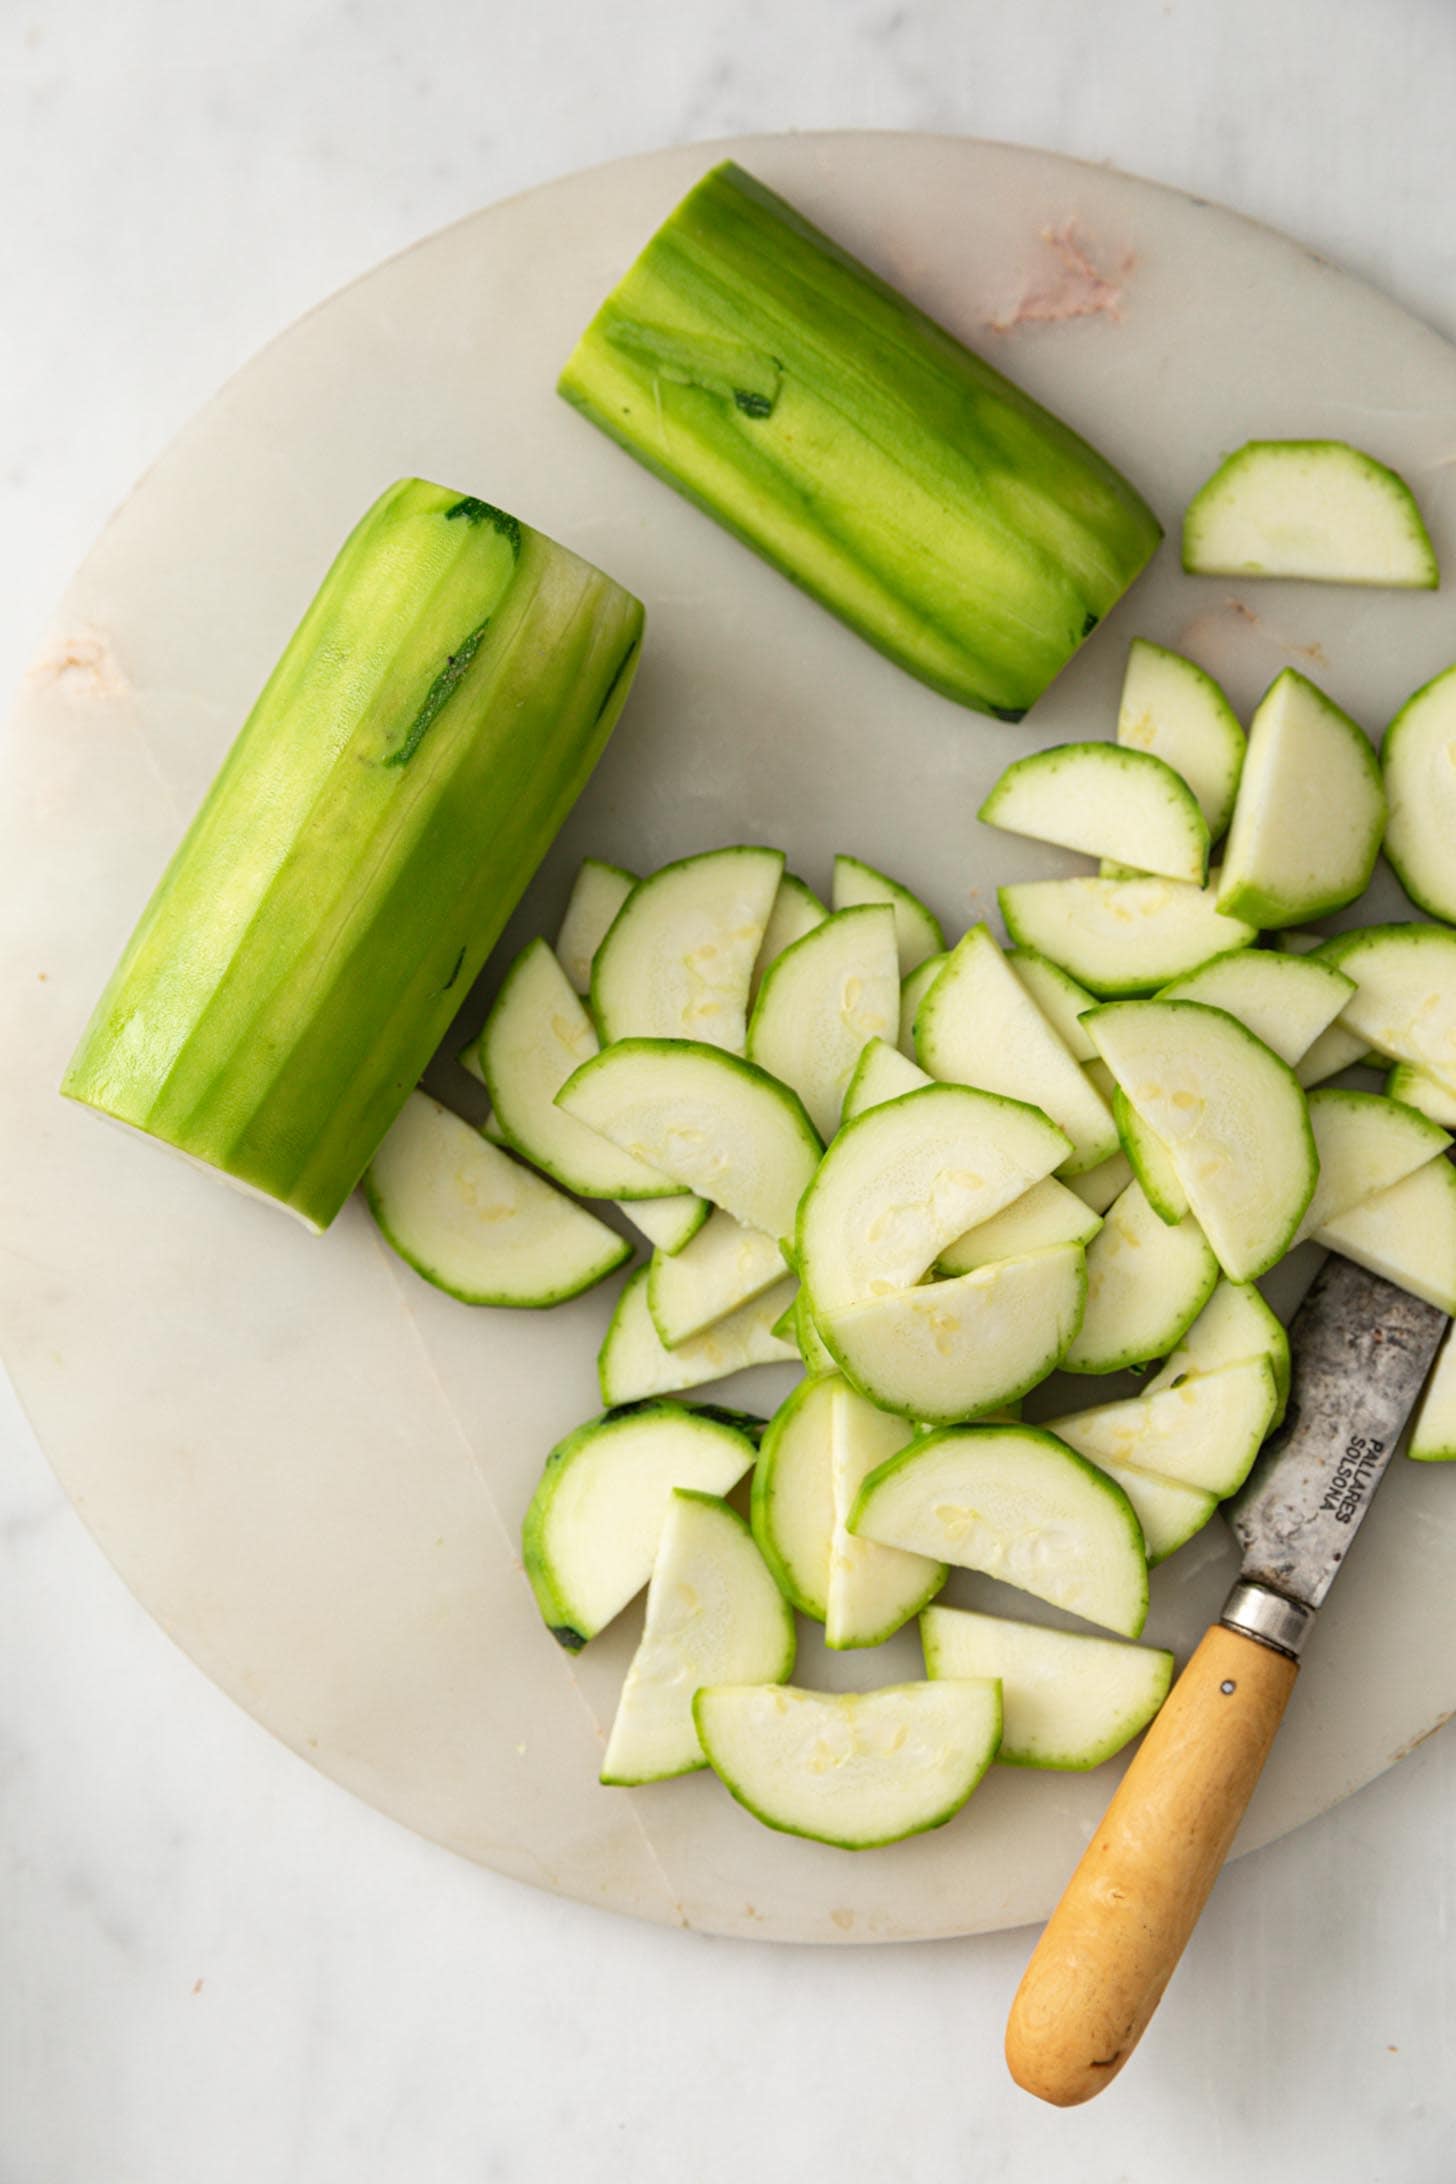 Peeled and sliced zucchini half moons on a plate with a knife.